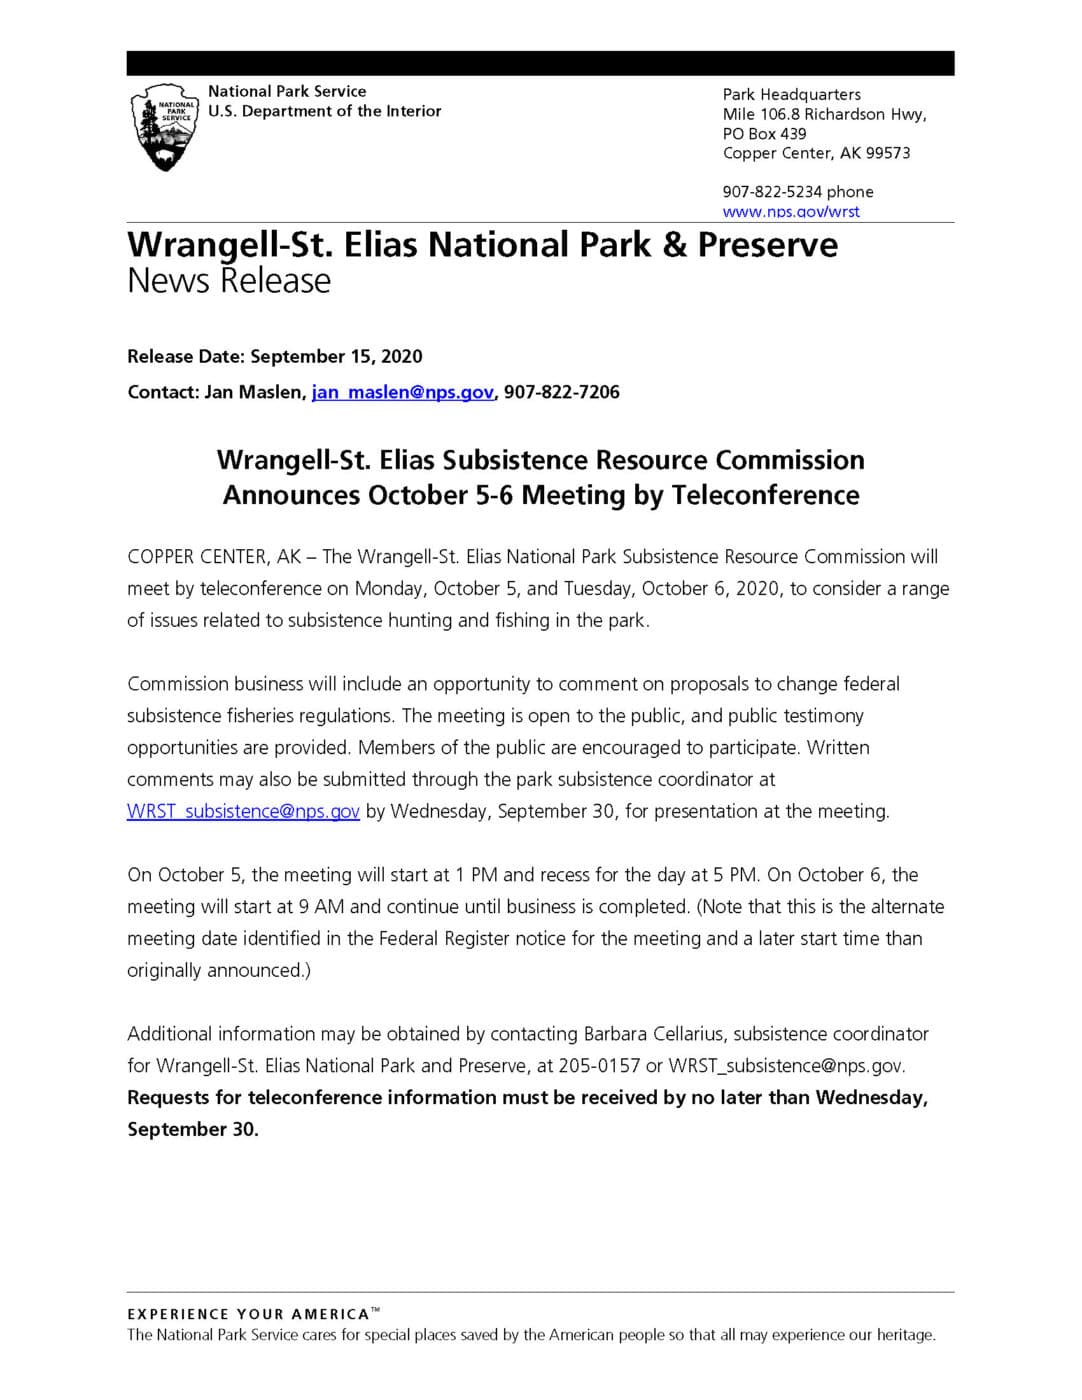 Wrangell - St. Elias National Park and Preserve News Release